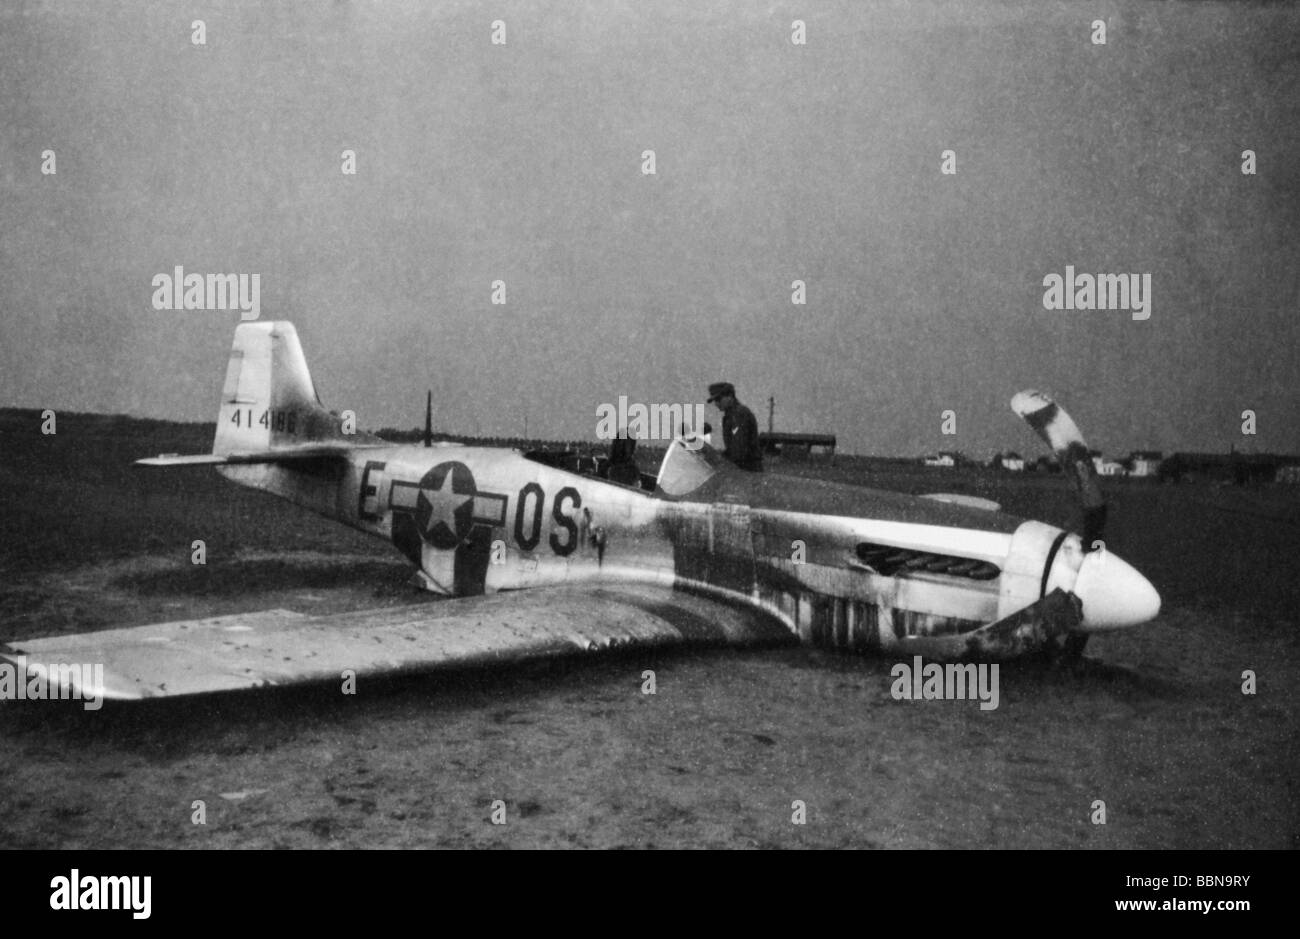 events, Second World War / WWII, aerial warfare, aircraft, crashed / damaged, forced landed US fighter plane North American P-51 D Mustang, 1944 / 1945, Stock Photo